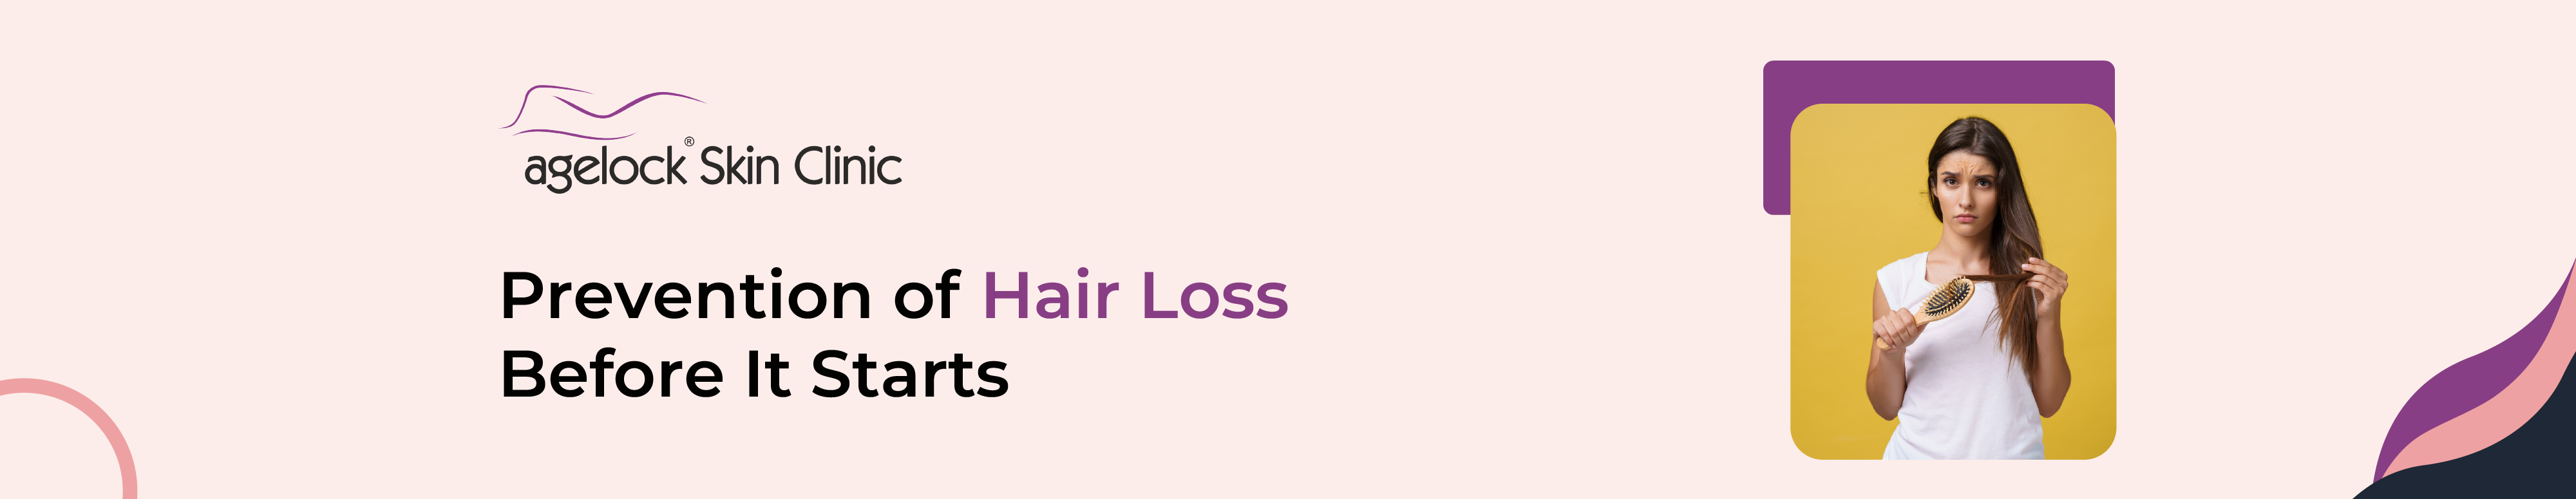 Prevention of Hair Loss Before It Starts